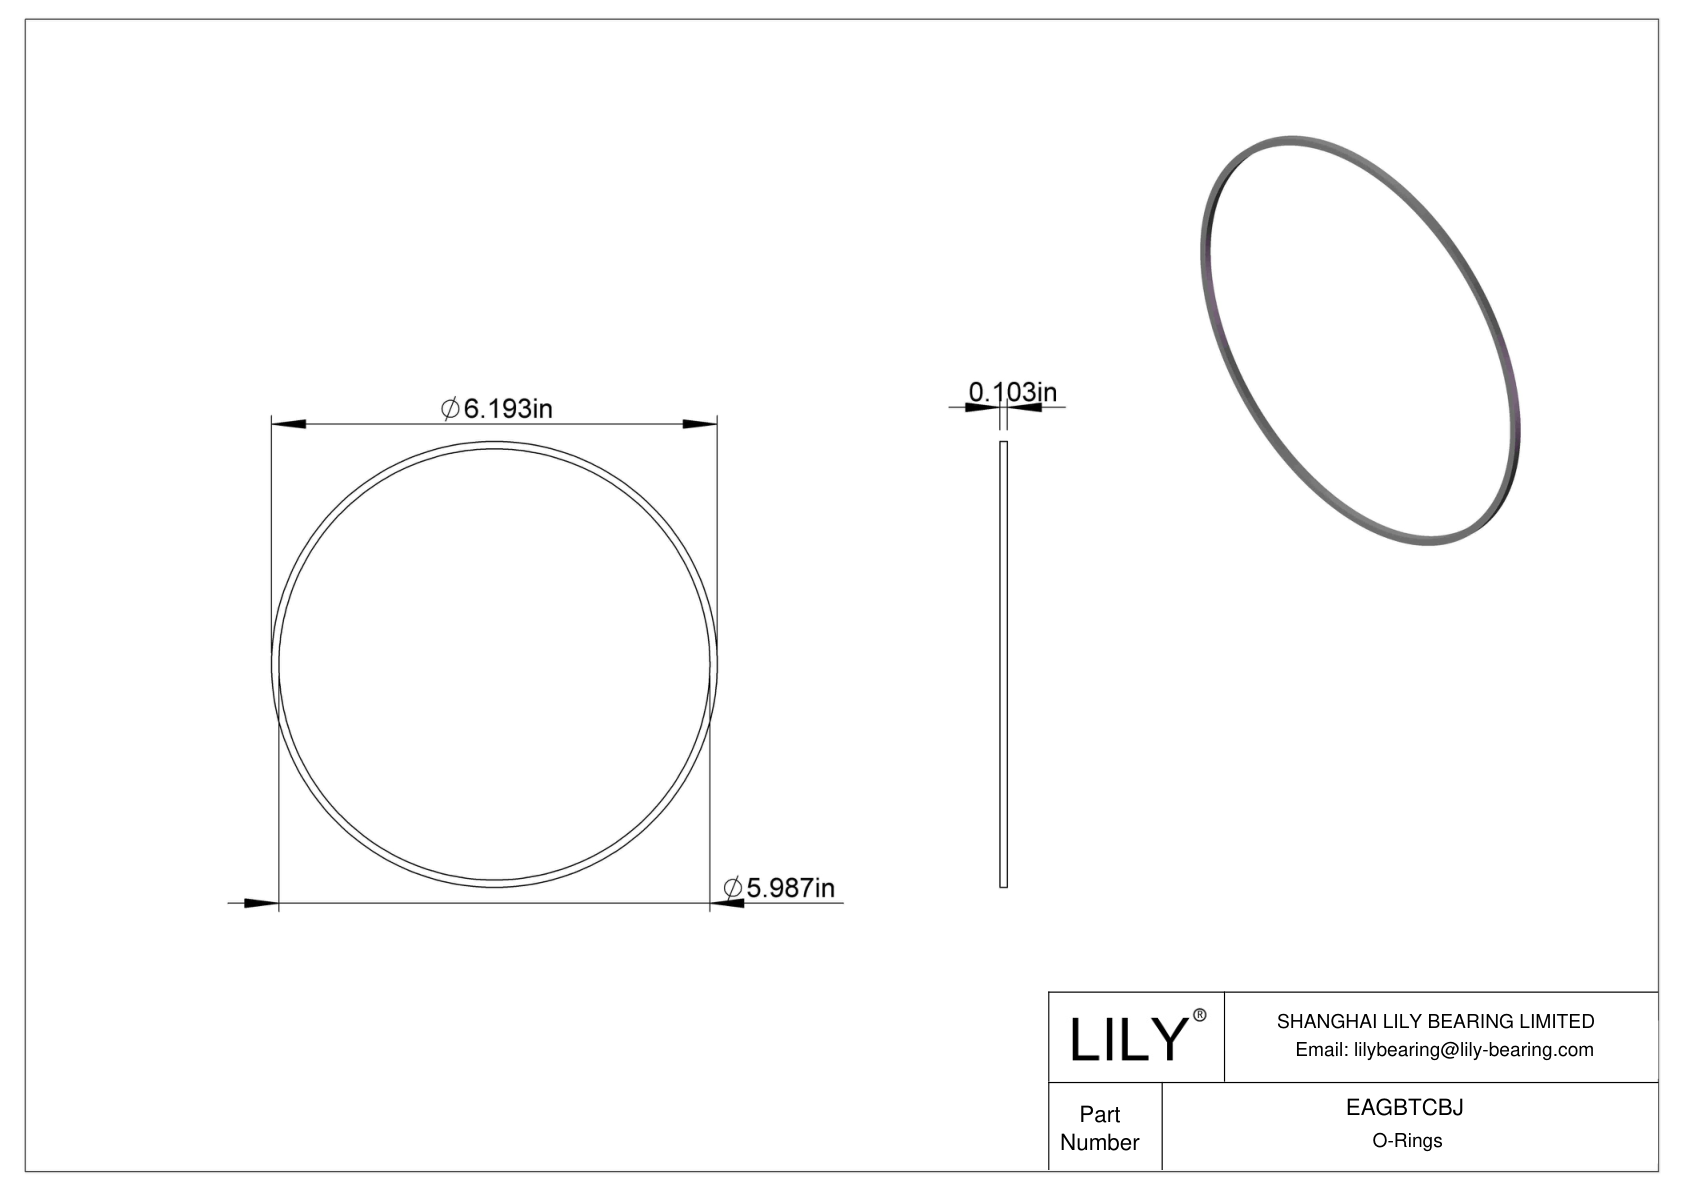 EAGBTCBJ Oil Resistant O-Rings Square cad drawing